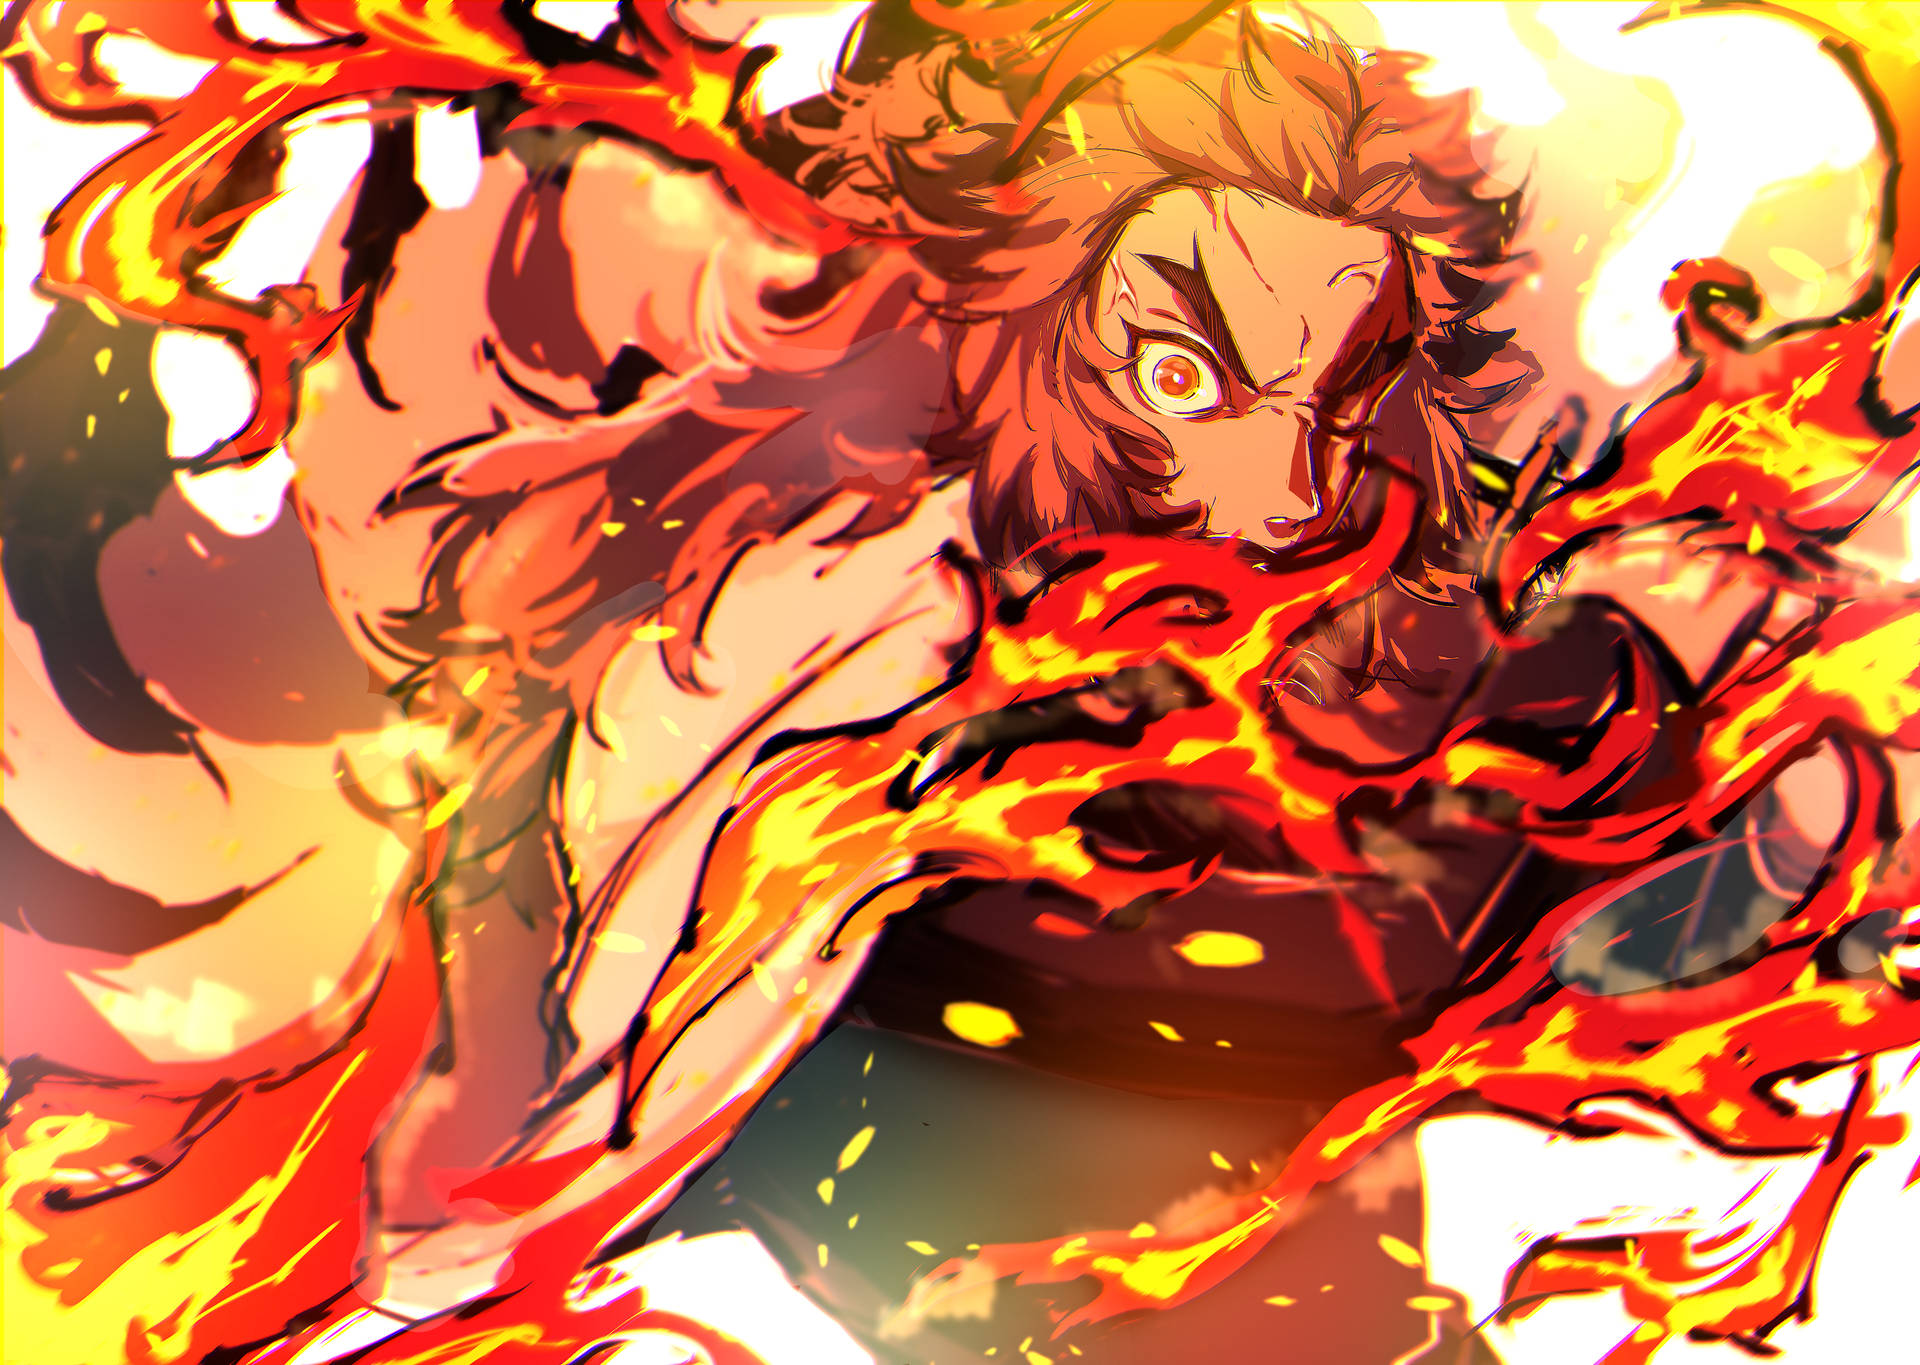 Kyojuro Rengoku Surrounded By Flames Wallpaper